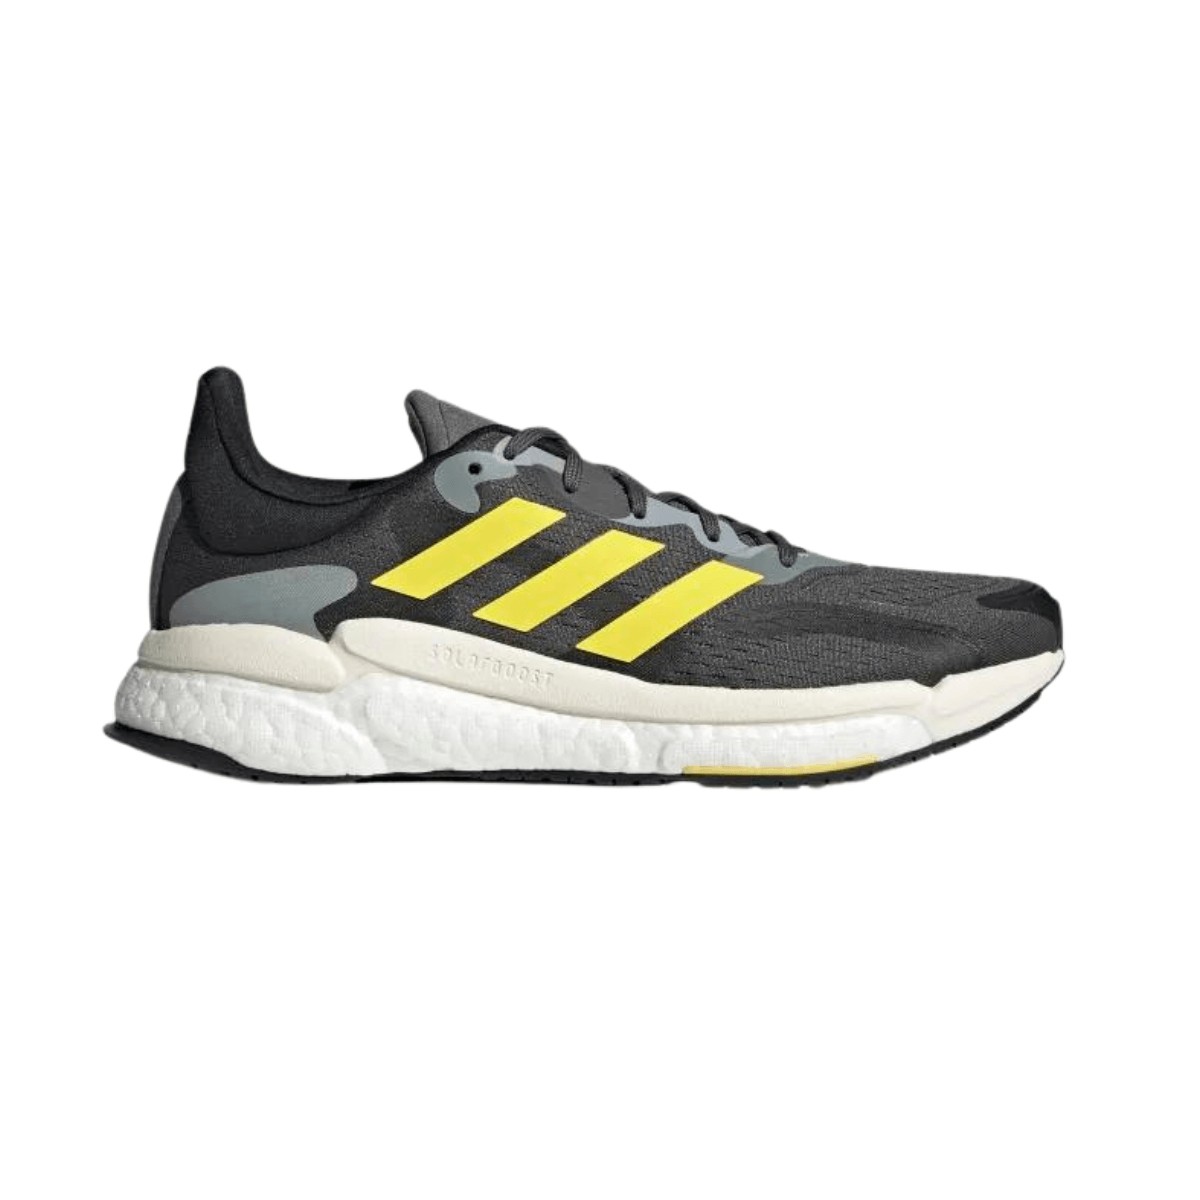 Chaussures Adidas Solar Boost 4 Black Yellow AW22, Taille UK 8.5